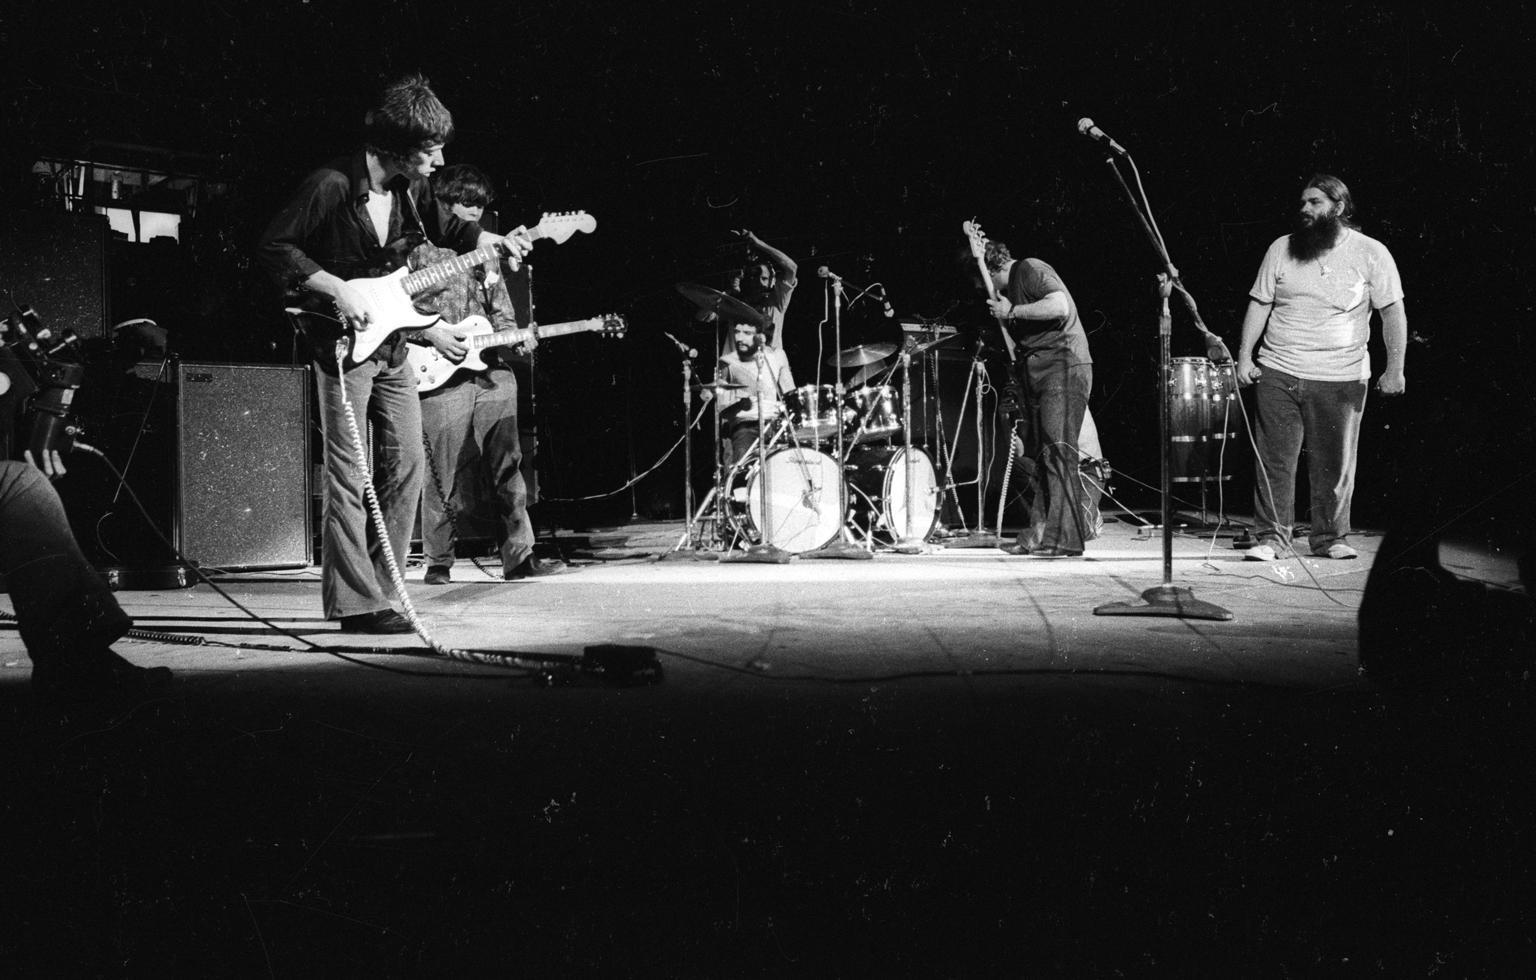 Henry Diltz Black and White Photograph - Canned Heat, Woodstock, NY, 1969